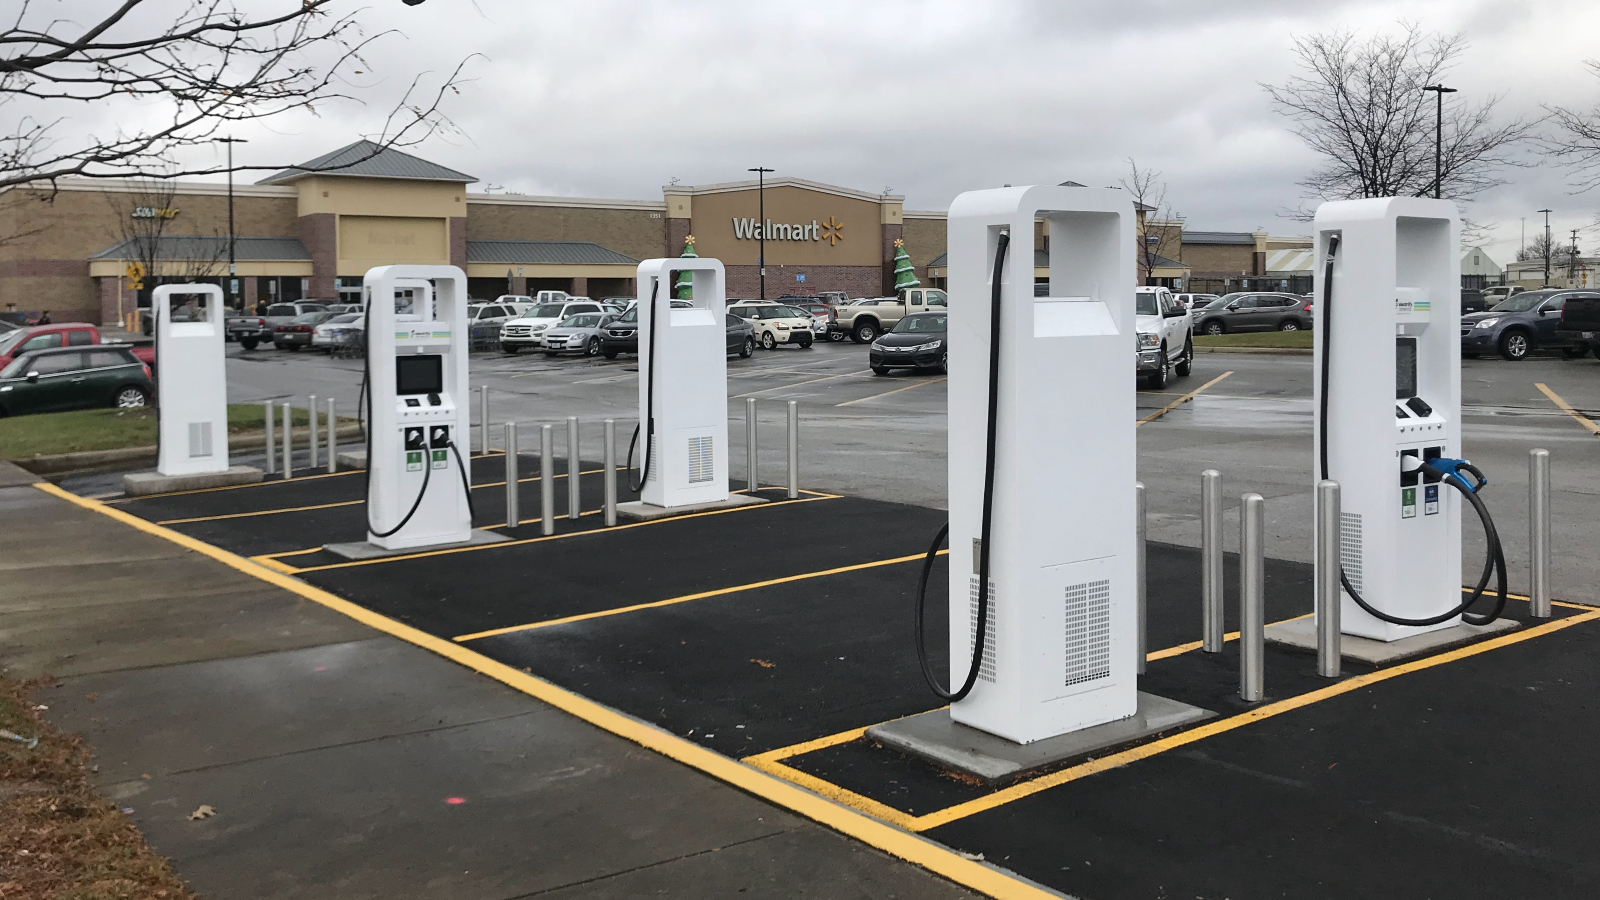 Photo of chargers at a Walmart parking lot.